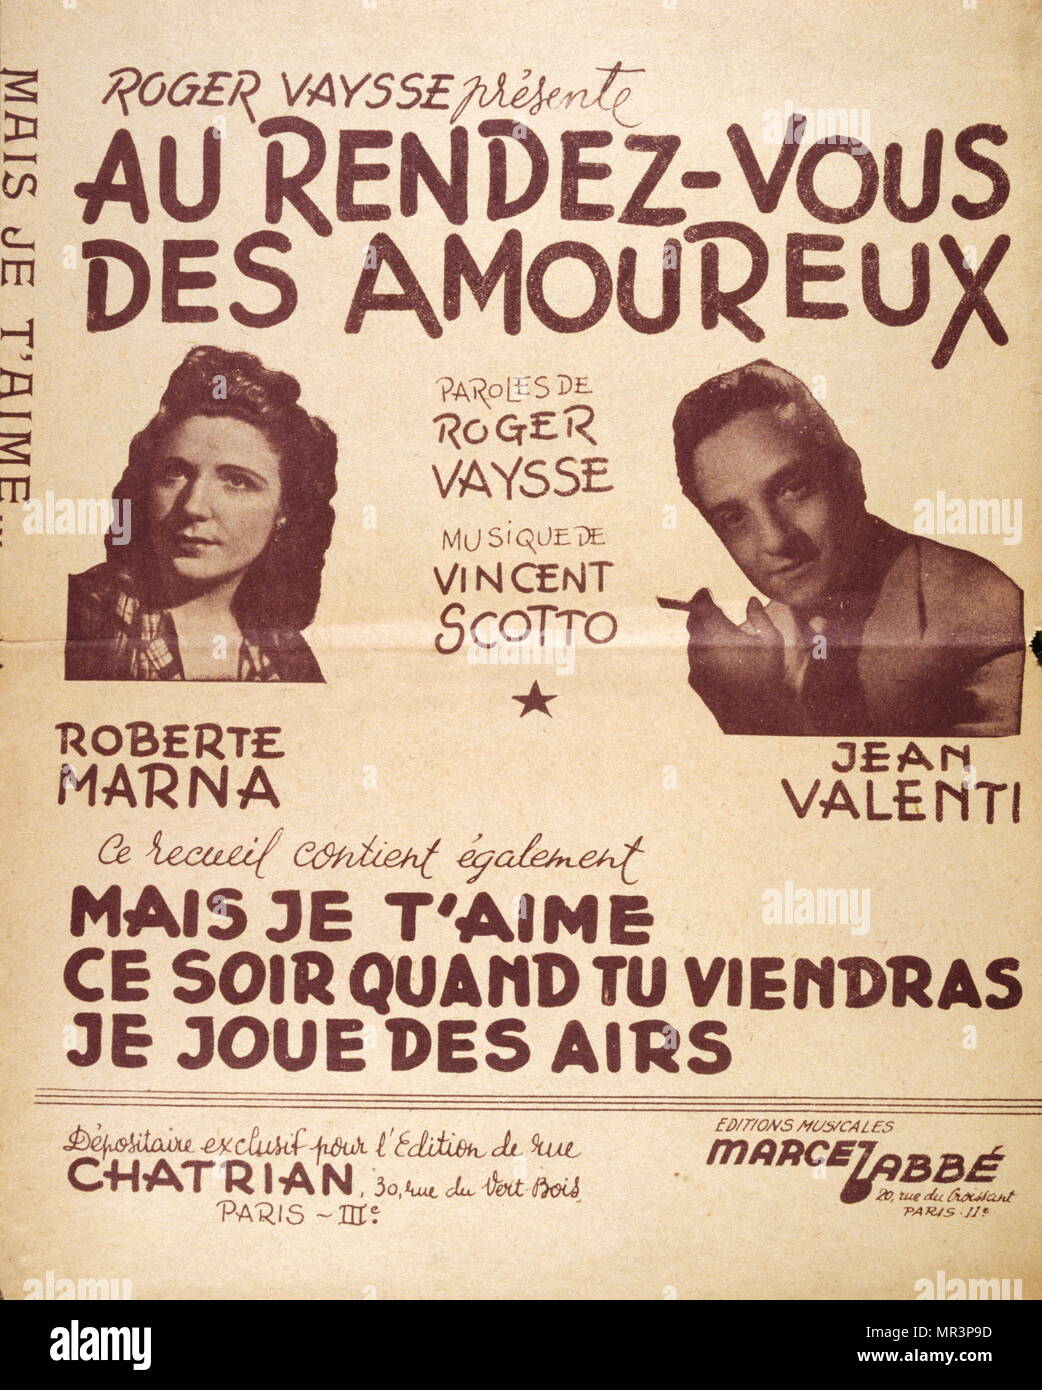 cover of the French song book 'Aux rendezvous des amoureux' sung by Roberte Marna and jean valenti Stock Photo